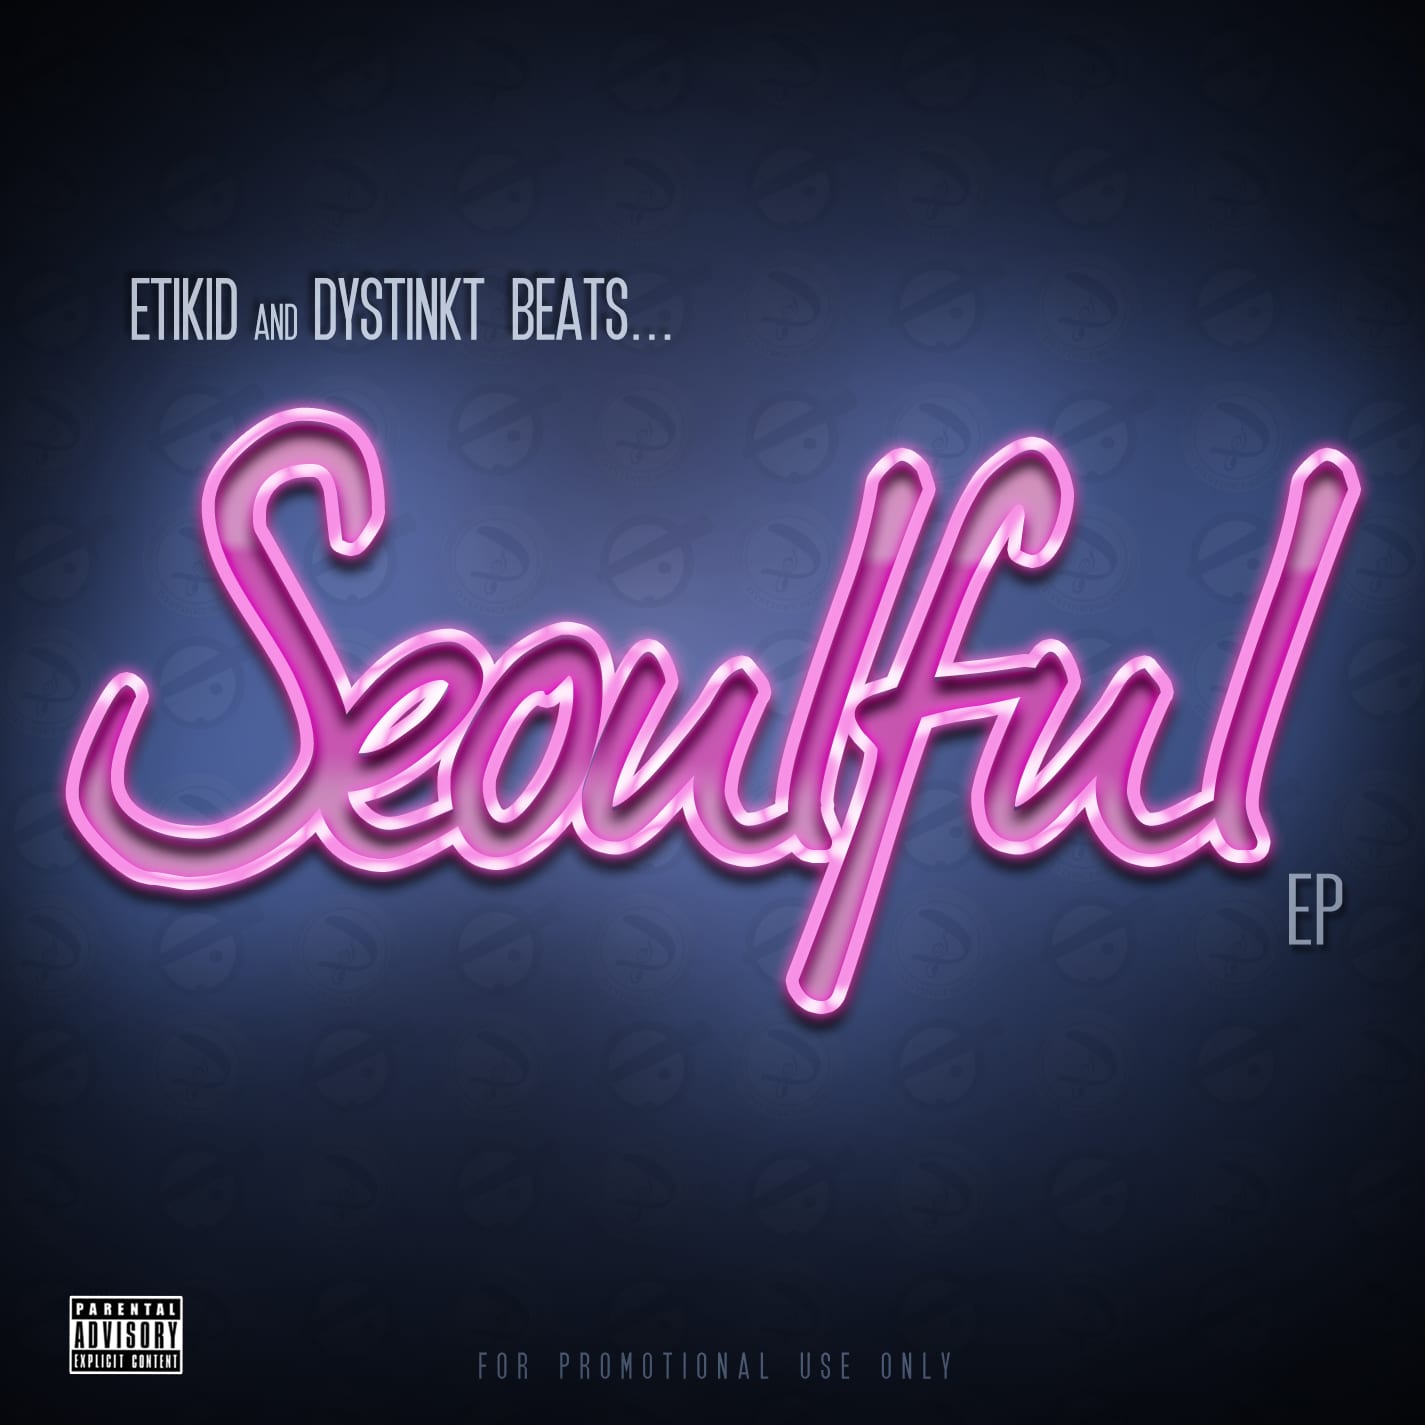 etikid and Dystinkt Beats - Seoulful EP cover